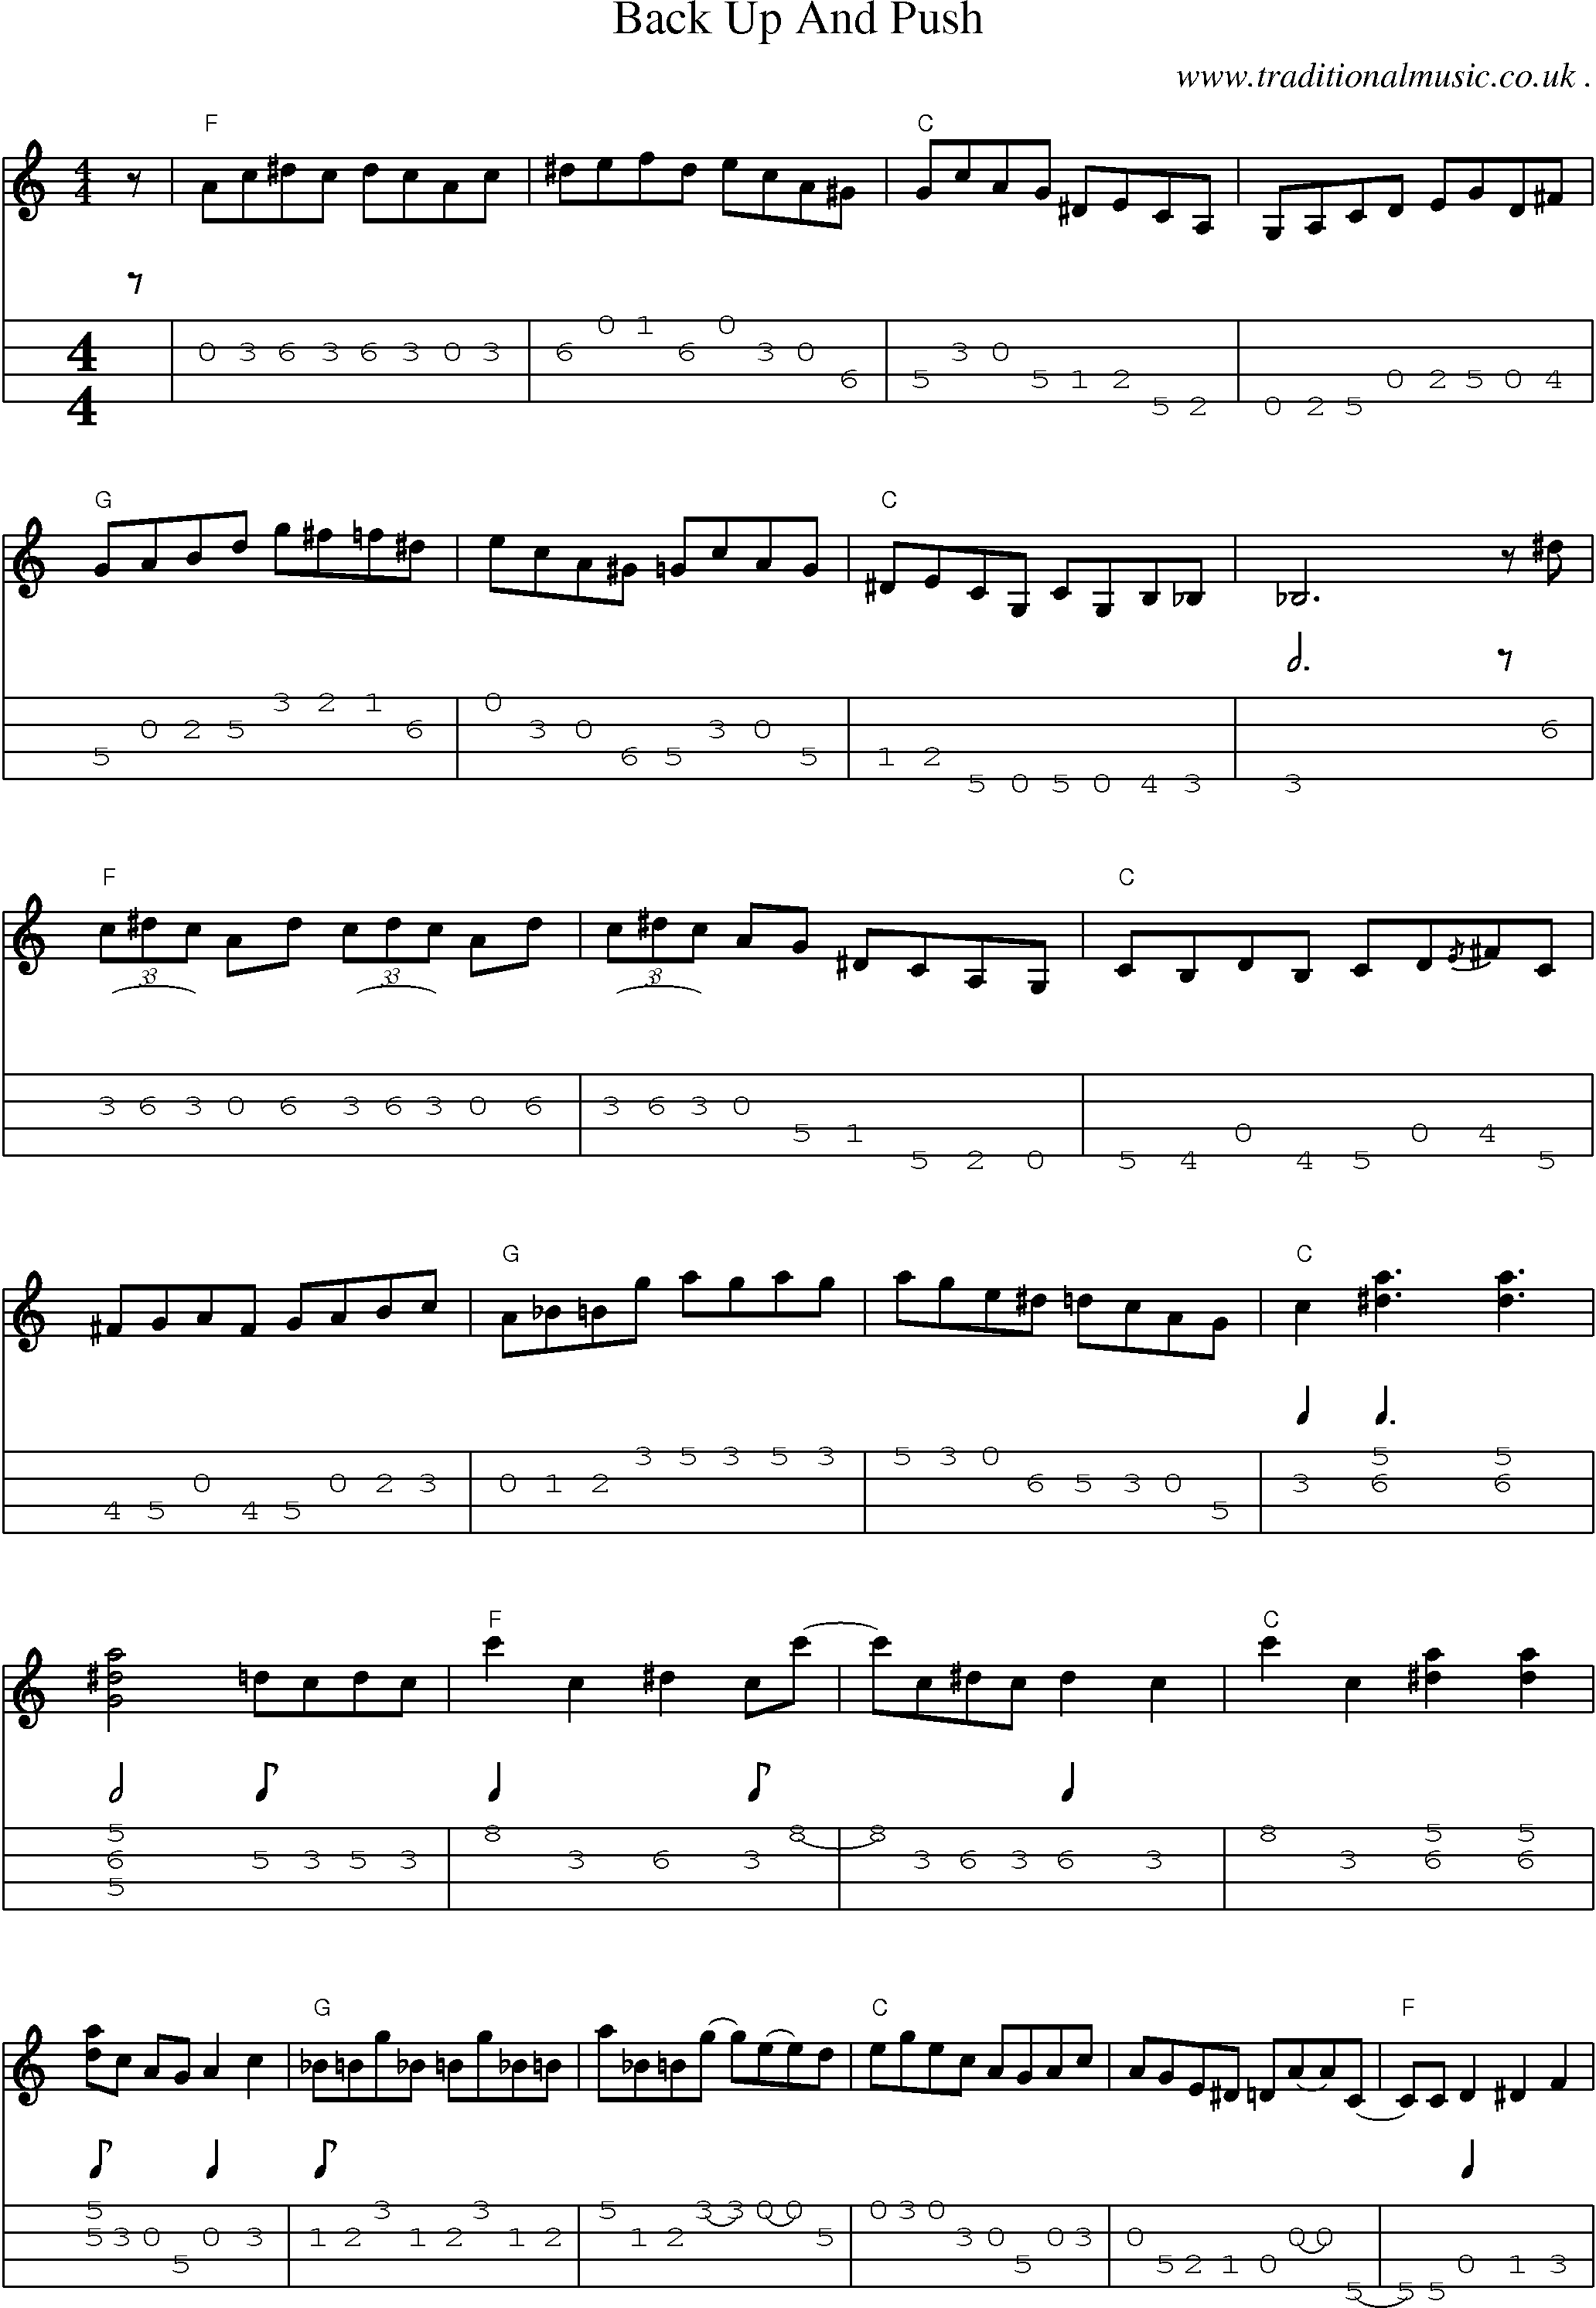 Music Score and Guitar Tabs for Back Up And Push